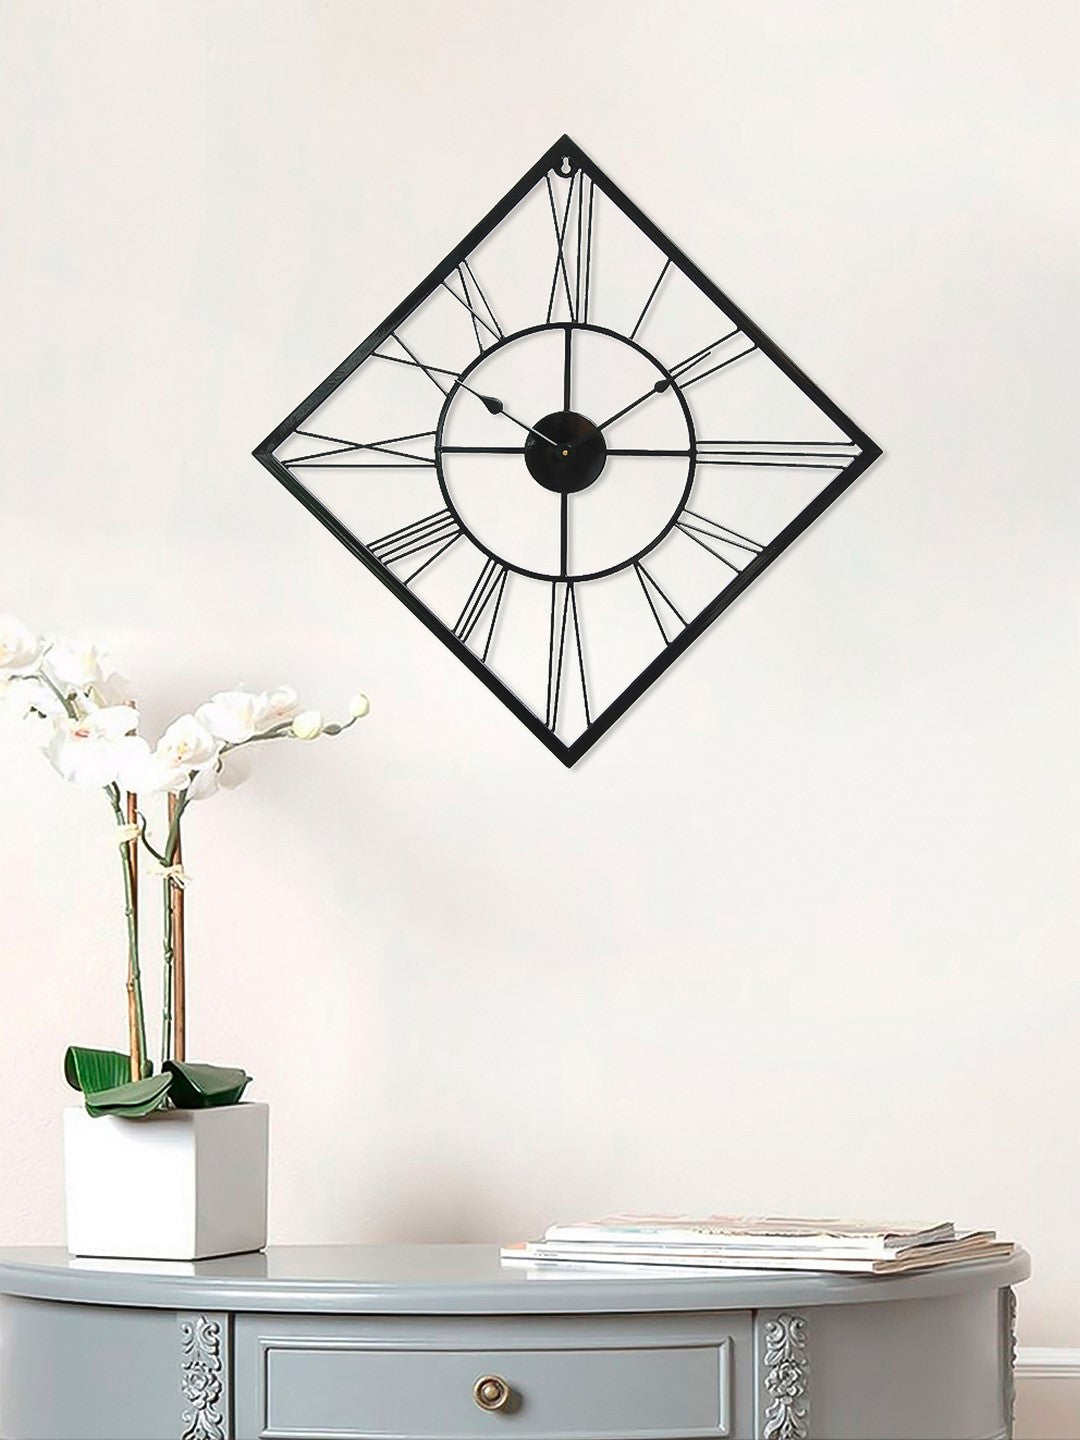 Black Iron Kite Shape Handcrafted Analog Roman Number Wall Clock Without Glass 2